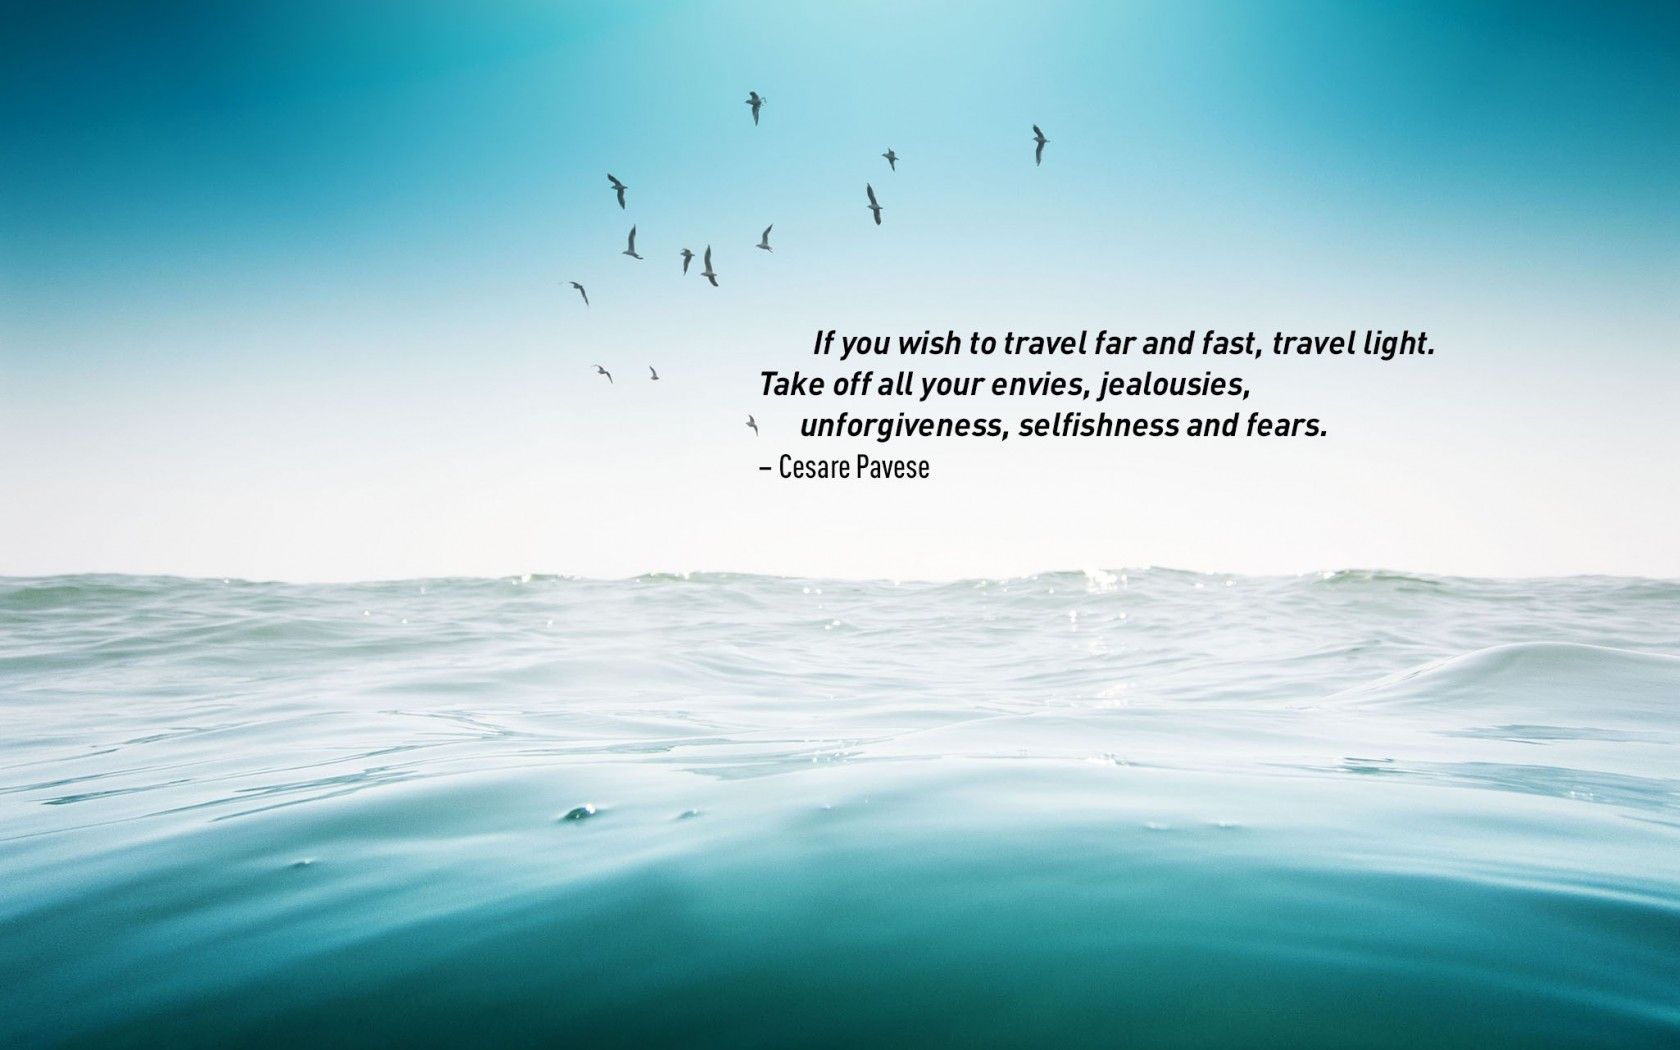 Beach Quotes Wallpapers